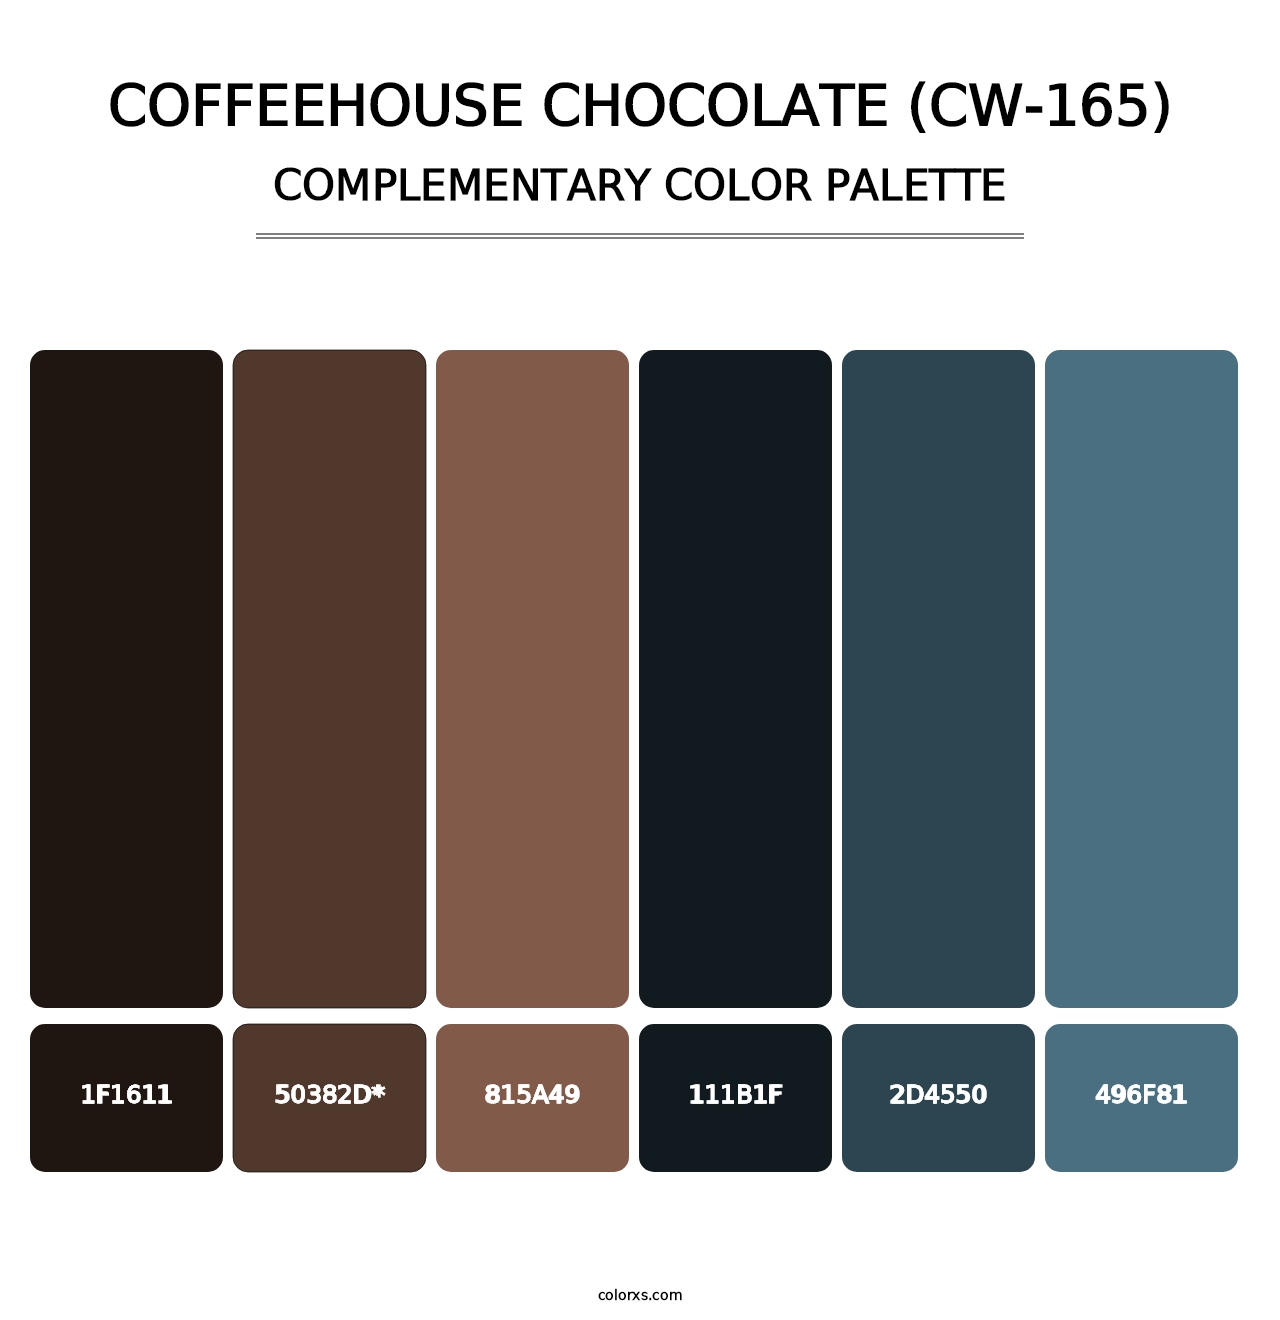 Coffeehouse Chocolate (CW-165) - Complementary Color Palette